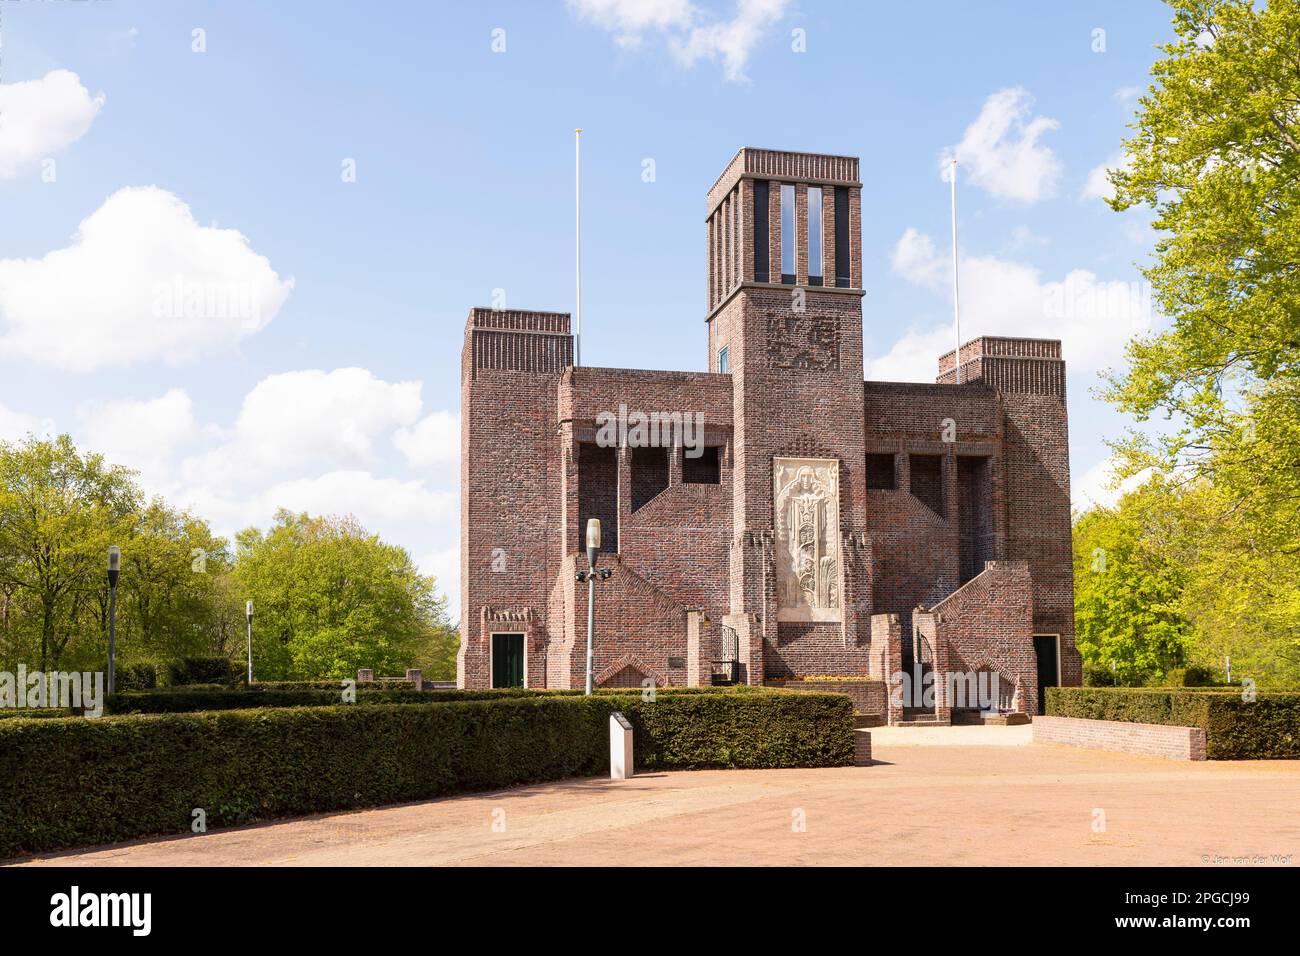 Belgian monument of the First World War, built by Belgian soldiers in gratitude; Amersfoort, Netherlands. Stock Photo